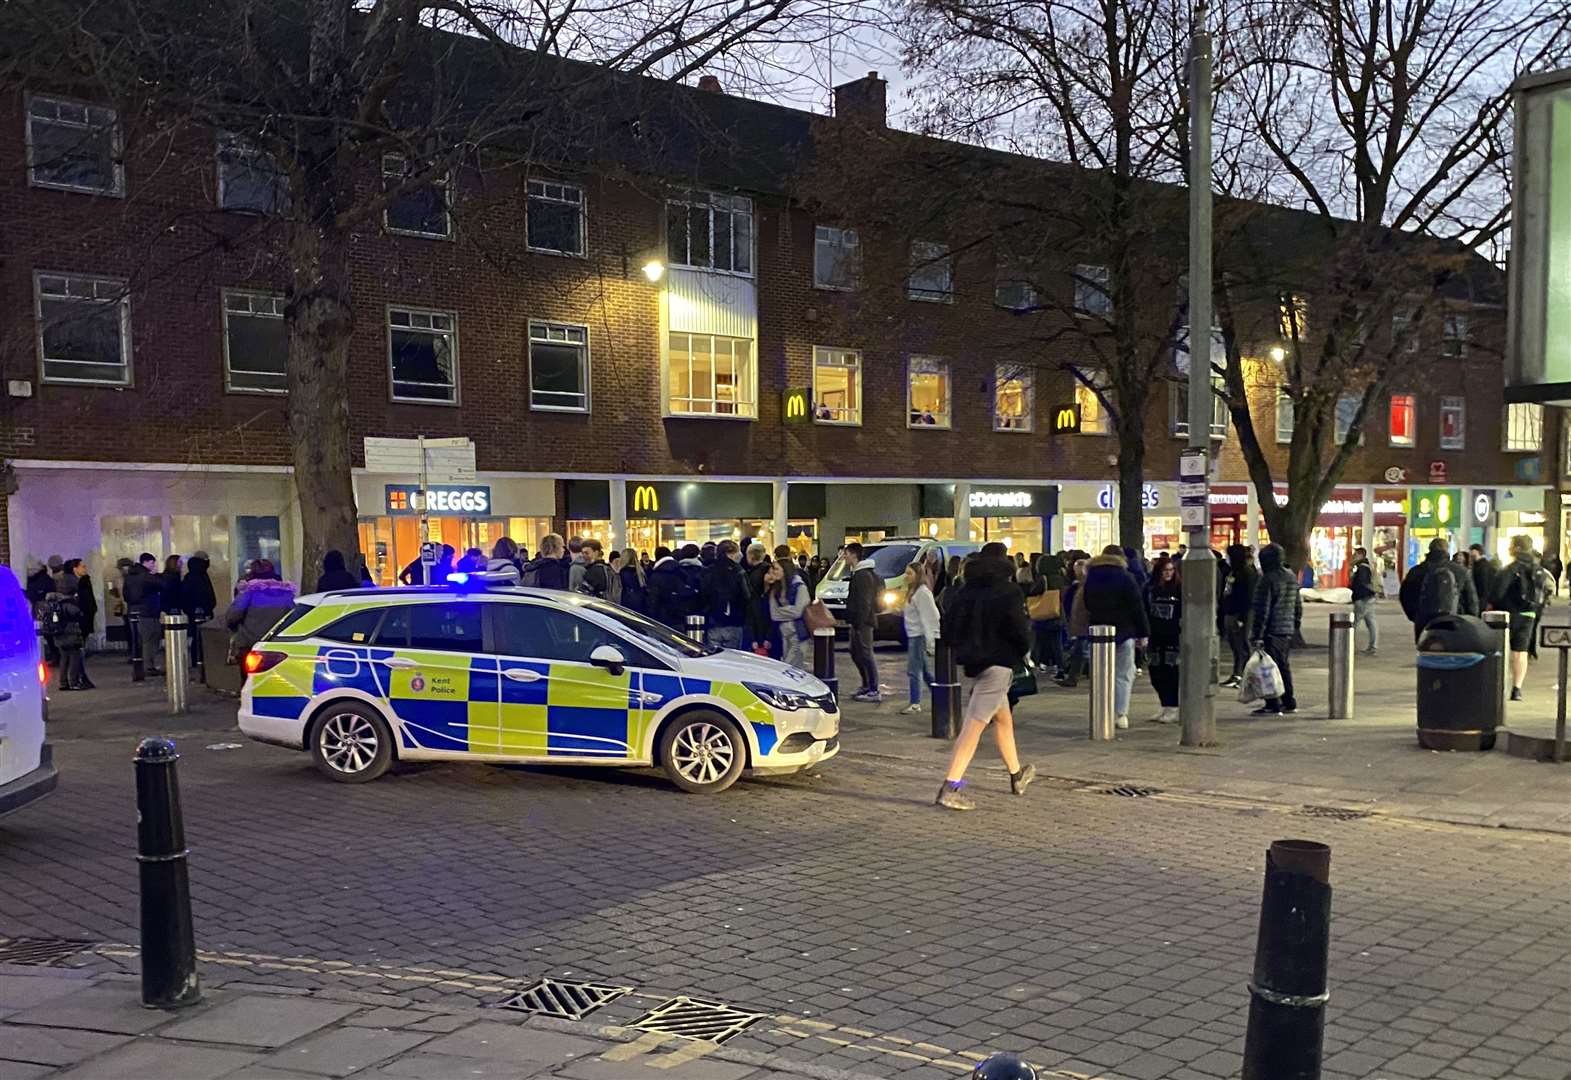 Officers were called to reports of a disturbance in Canterbury high street on Thursday